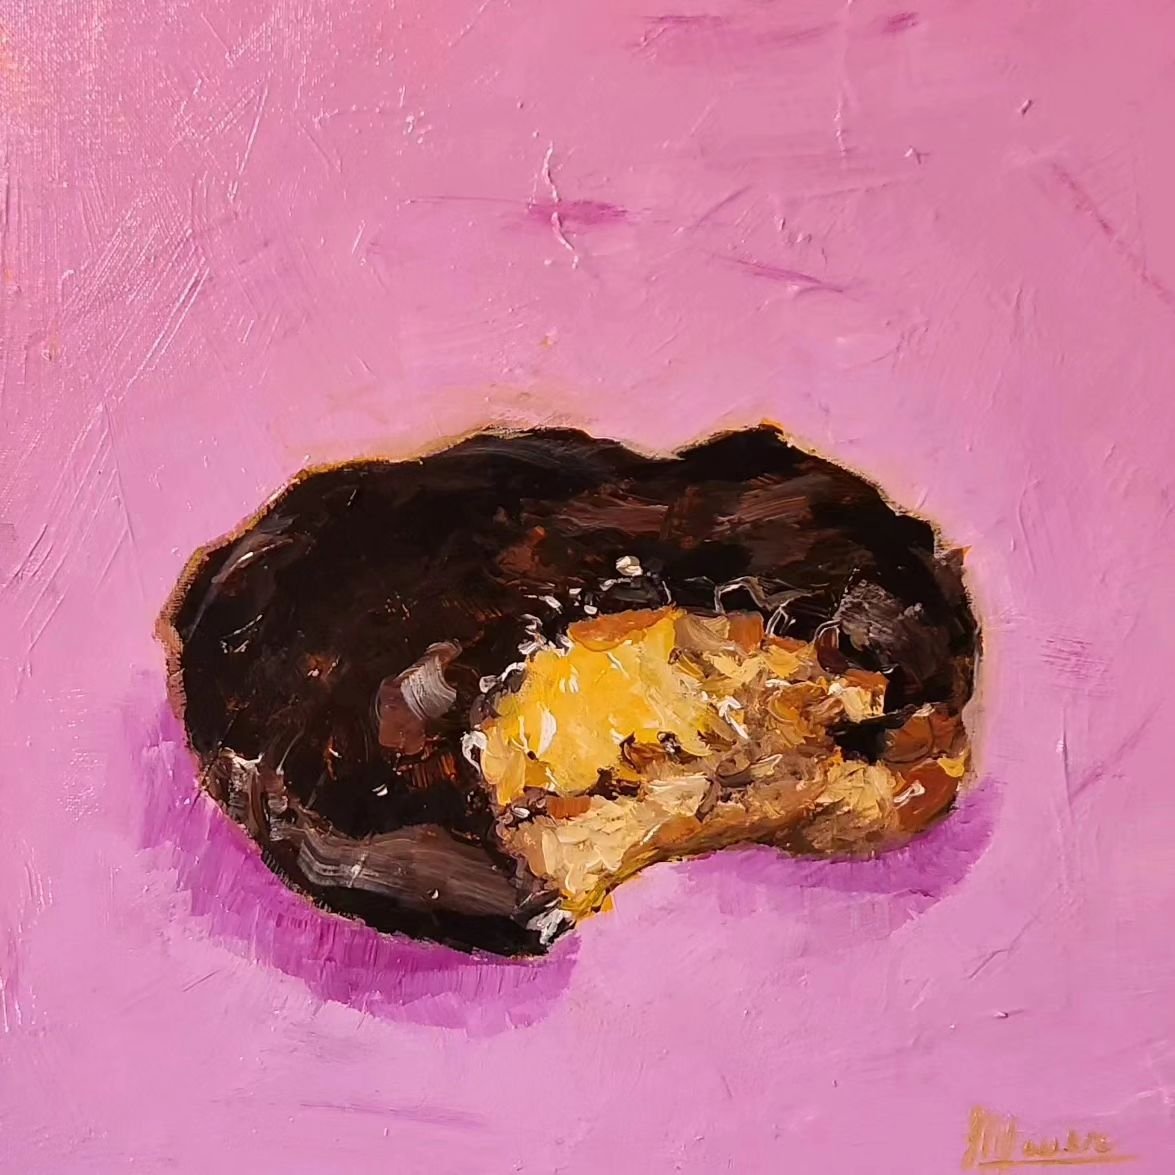 The first Boston cream I ever painted! 😋 🍩  Available for a sweet home. Head over to my website and check out all the delicious updates, including my December Donation!

10% of all sales and 20% of pet portraits will be donated to the Humane Societ